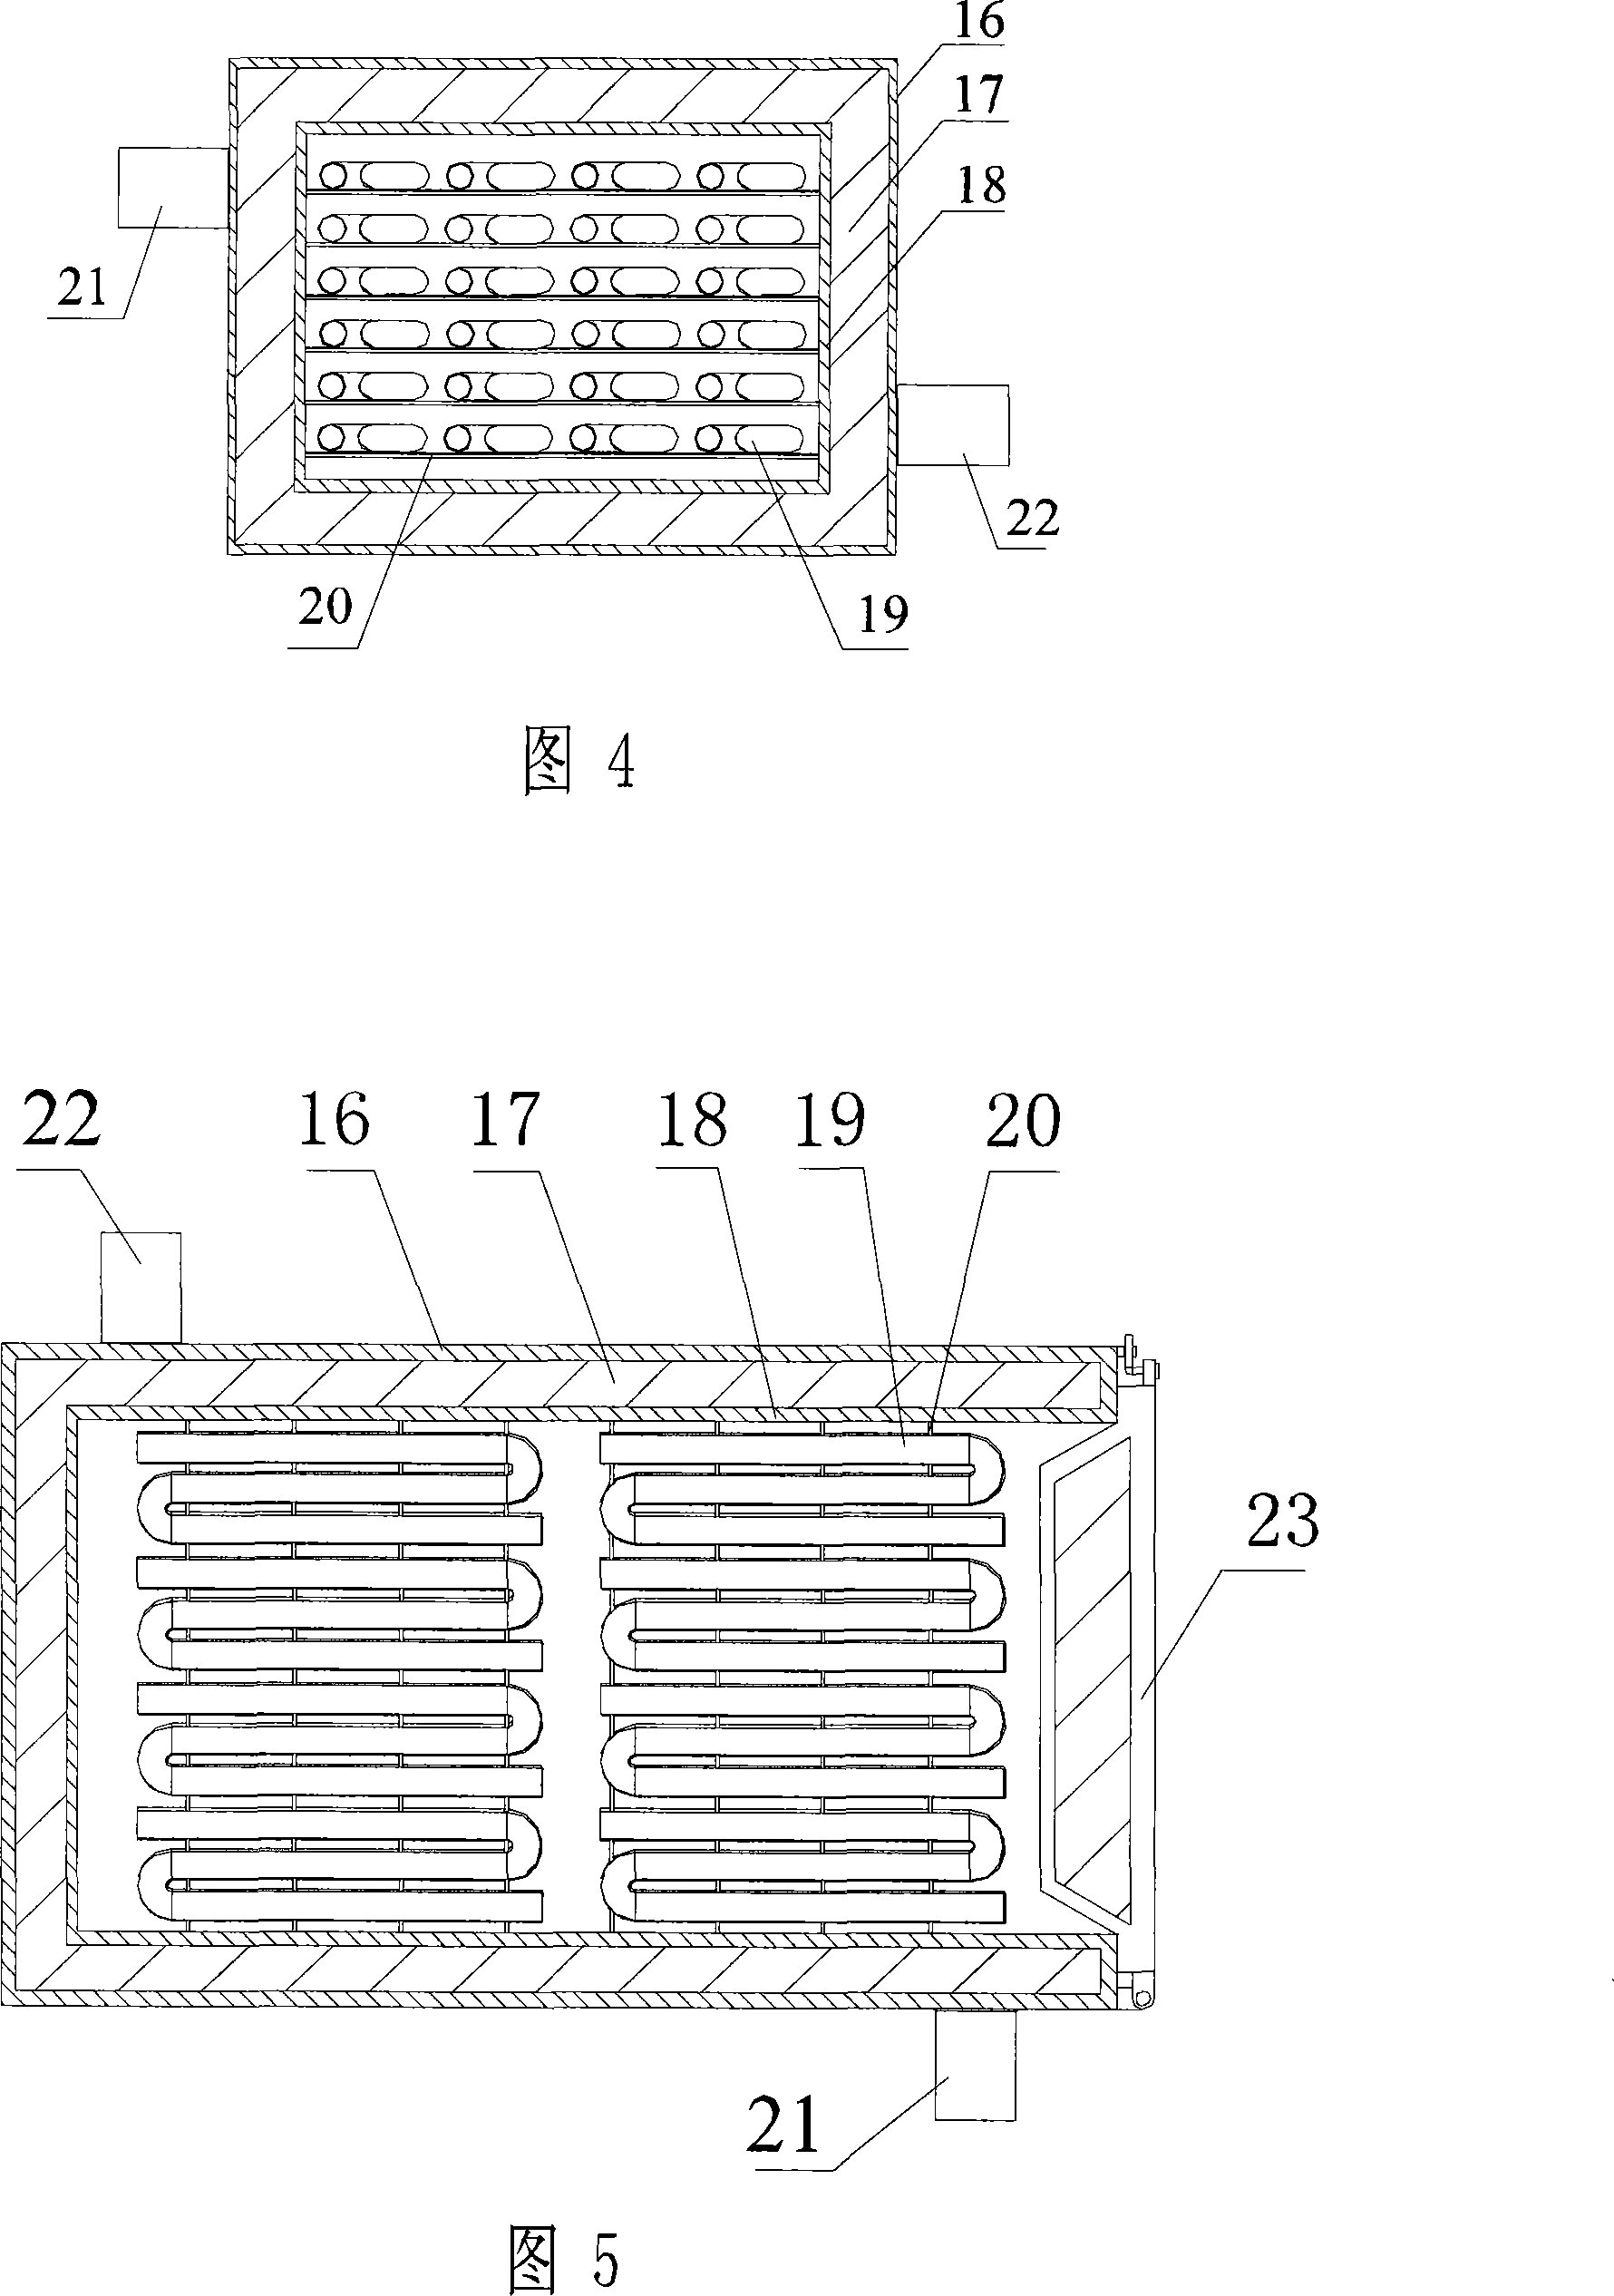 Apparatus for testing and evaluating heat-filling and heat-discharging process of thermal storage device